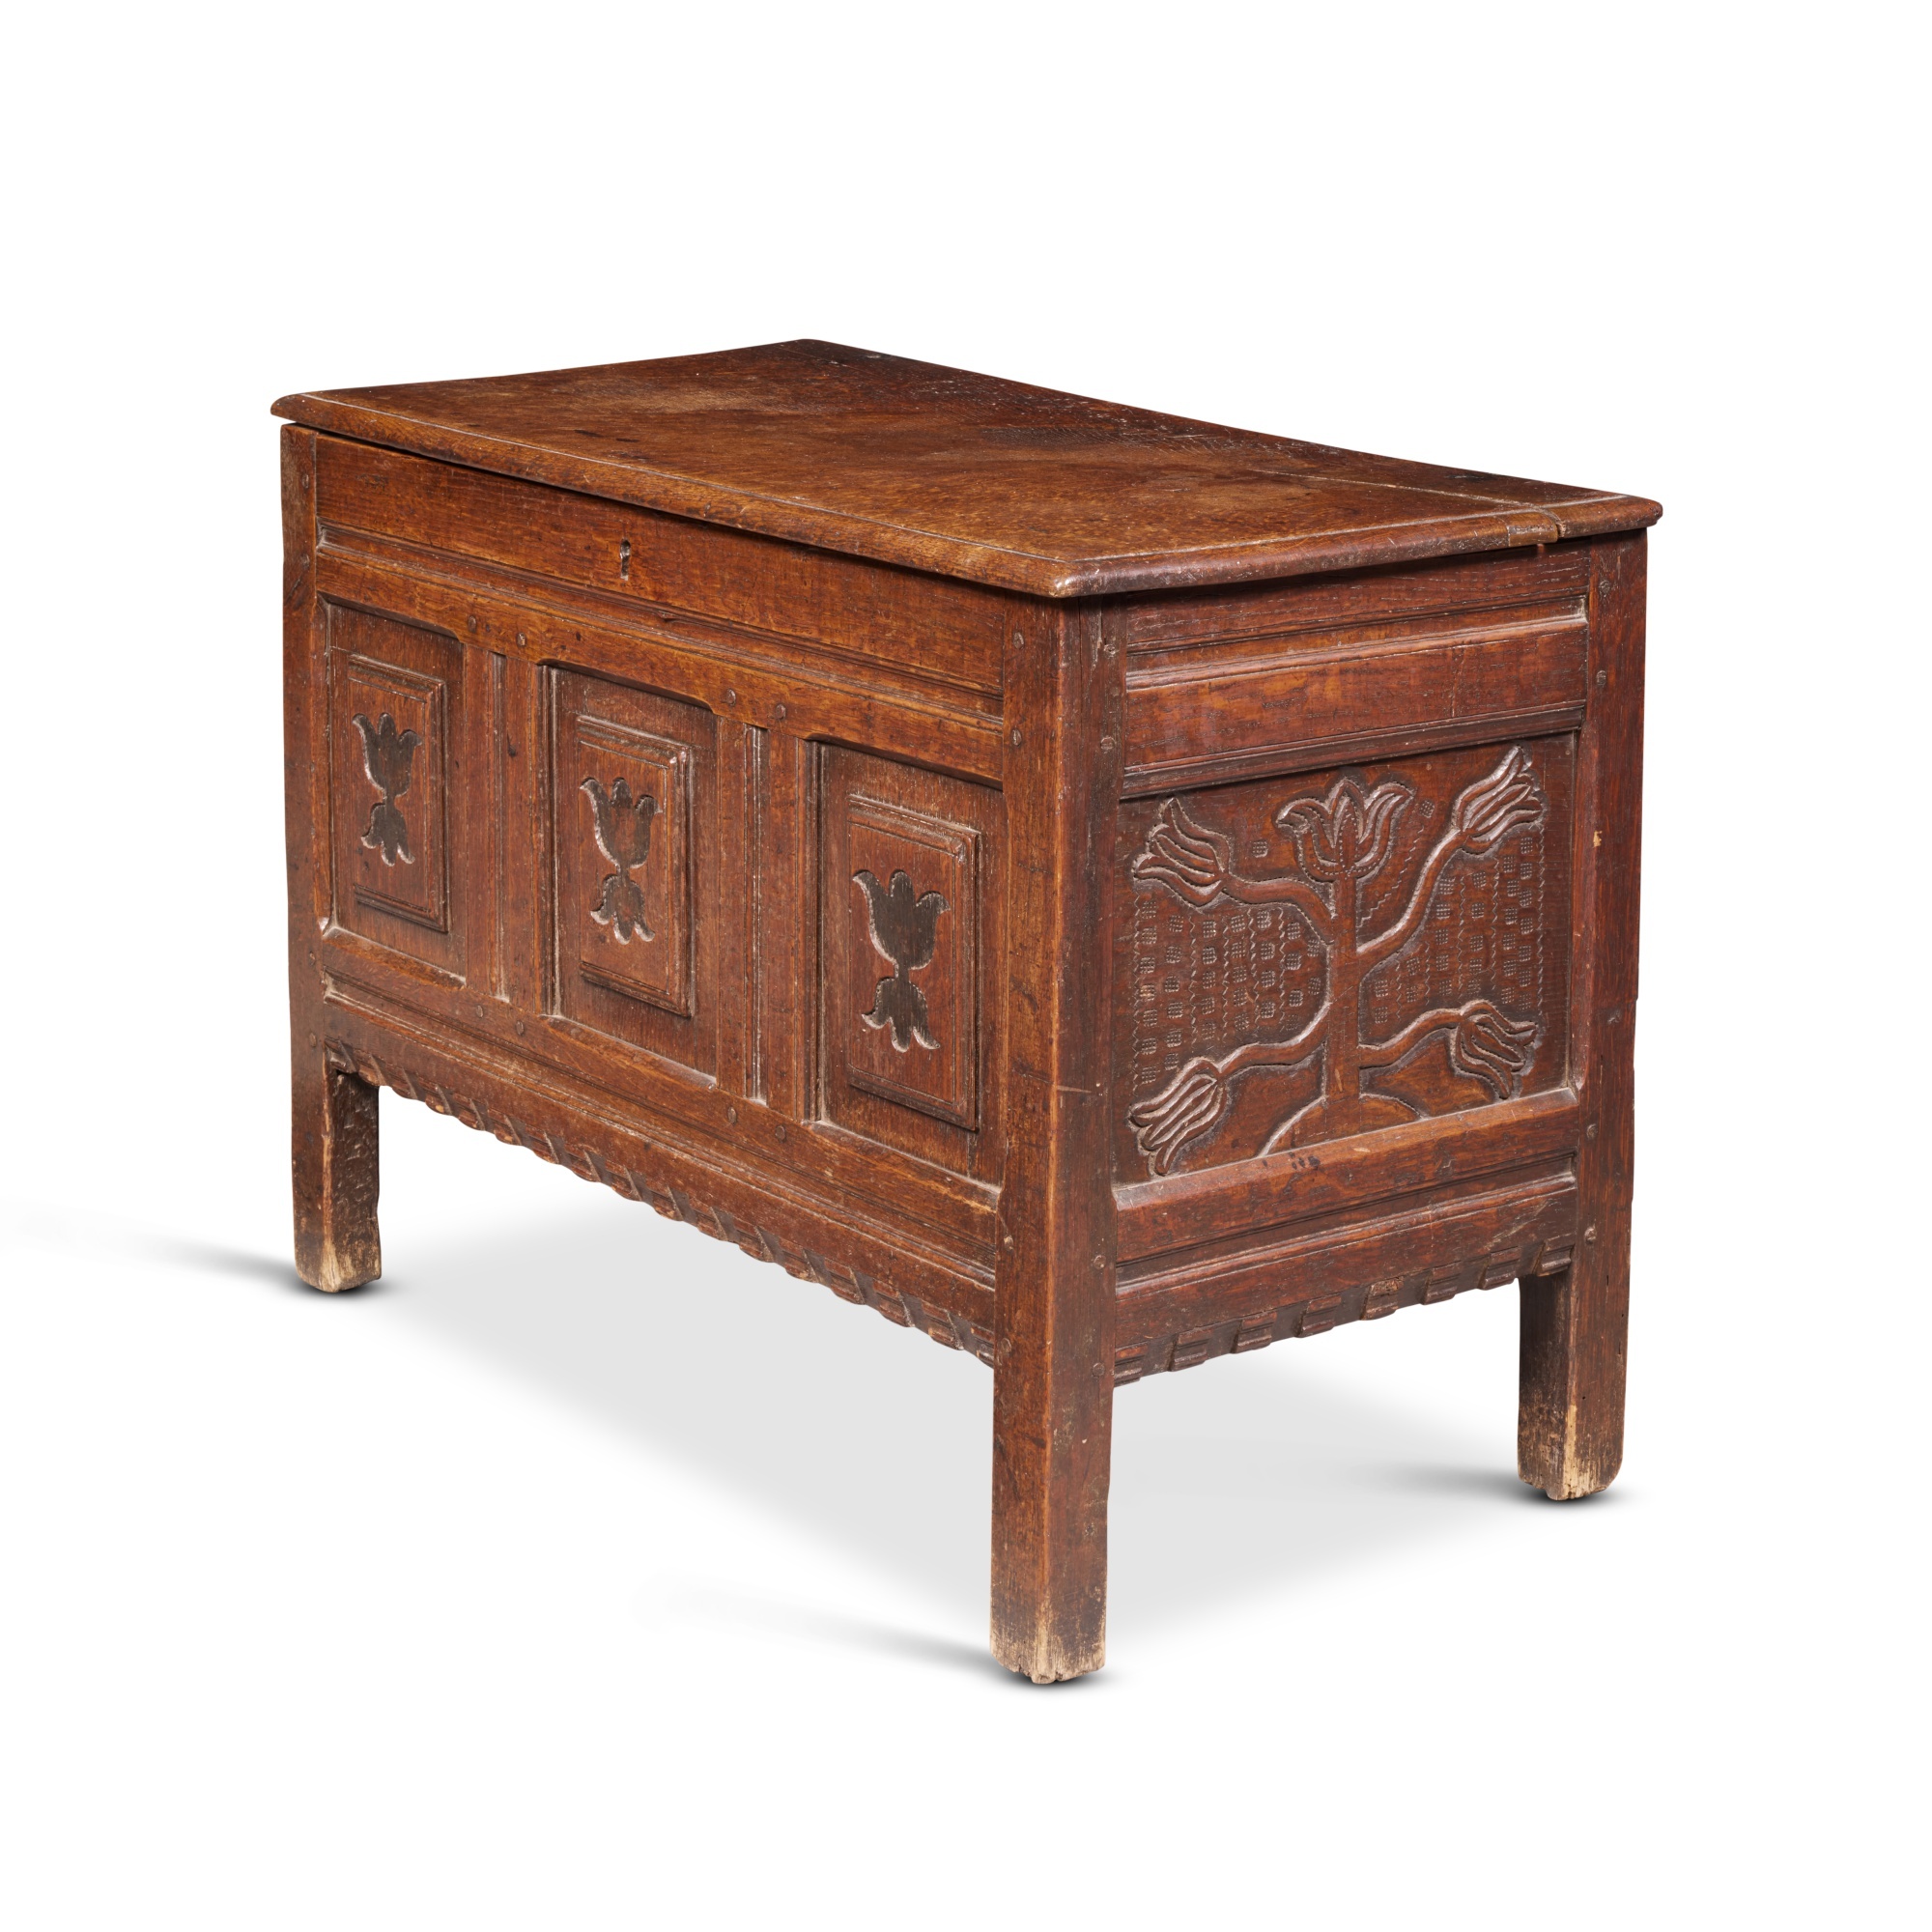 A Dutch Mannerist Carved Oak Chest, late 16th Century - Image 4 of 5